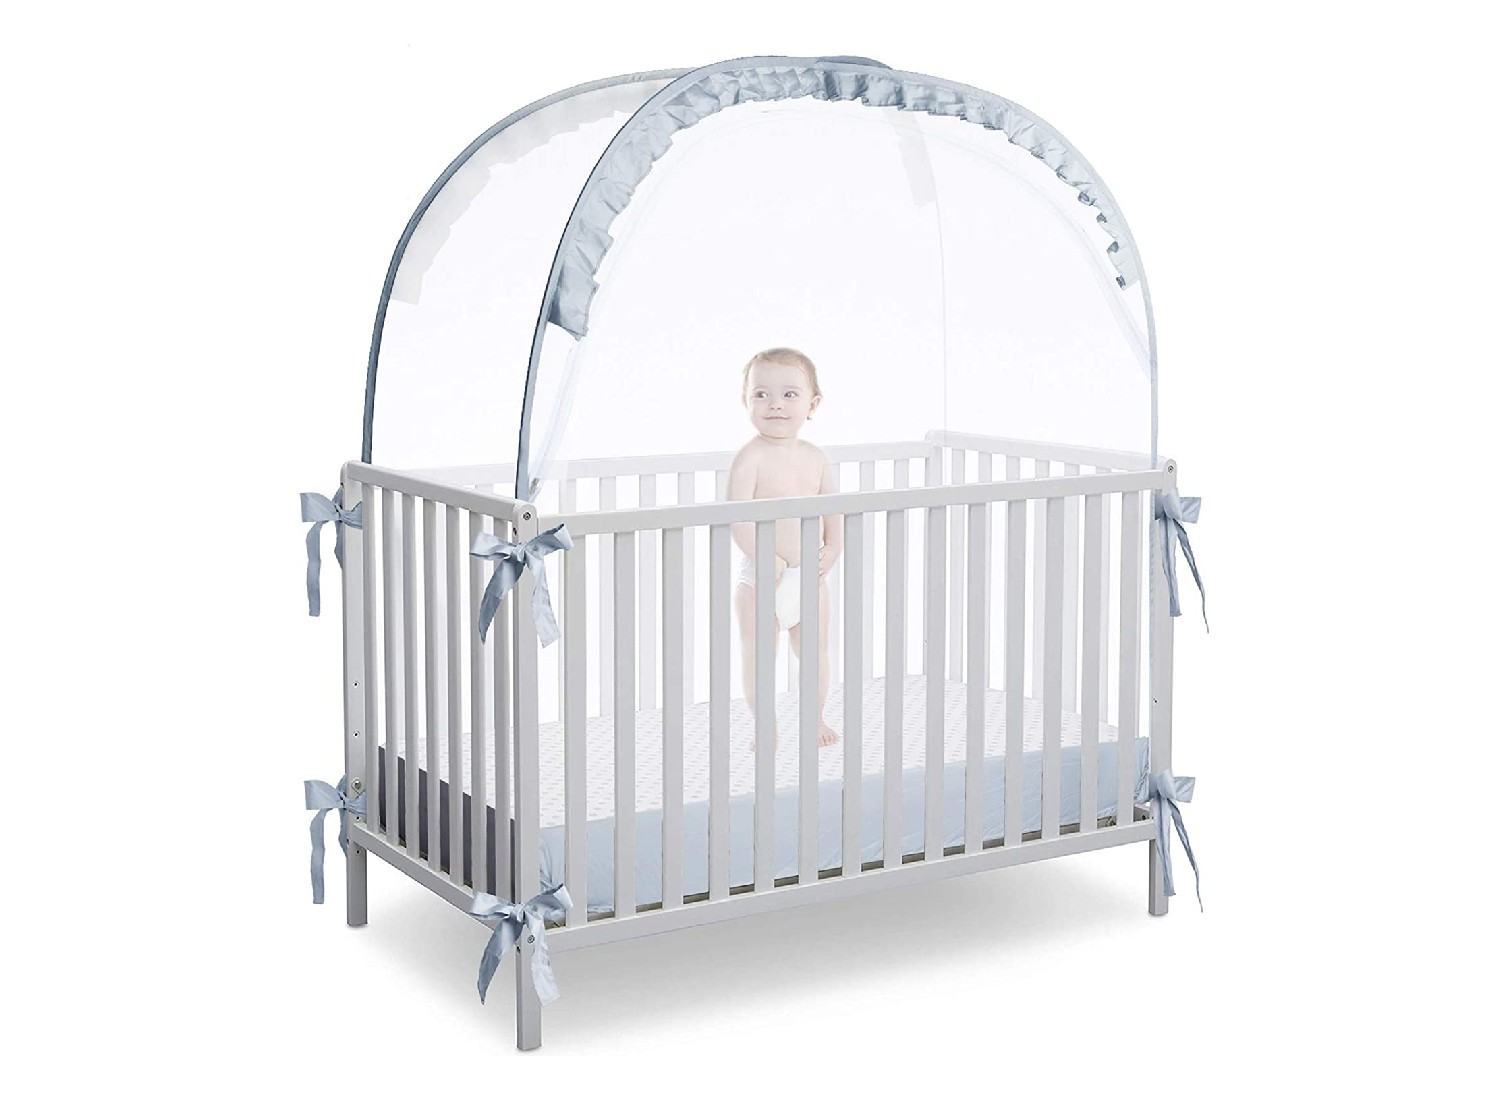 Premium Original Australian Pop Up Crib Canopy. Best Travel Crib Tent Proven to Keep Your Baby from Climbing Out of The Crib 20+ Years Expertise in Crib Tent Design Trusted 